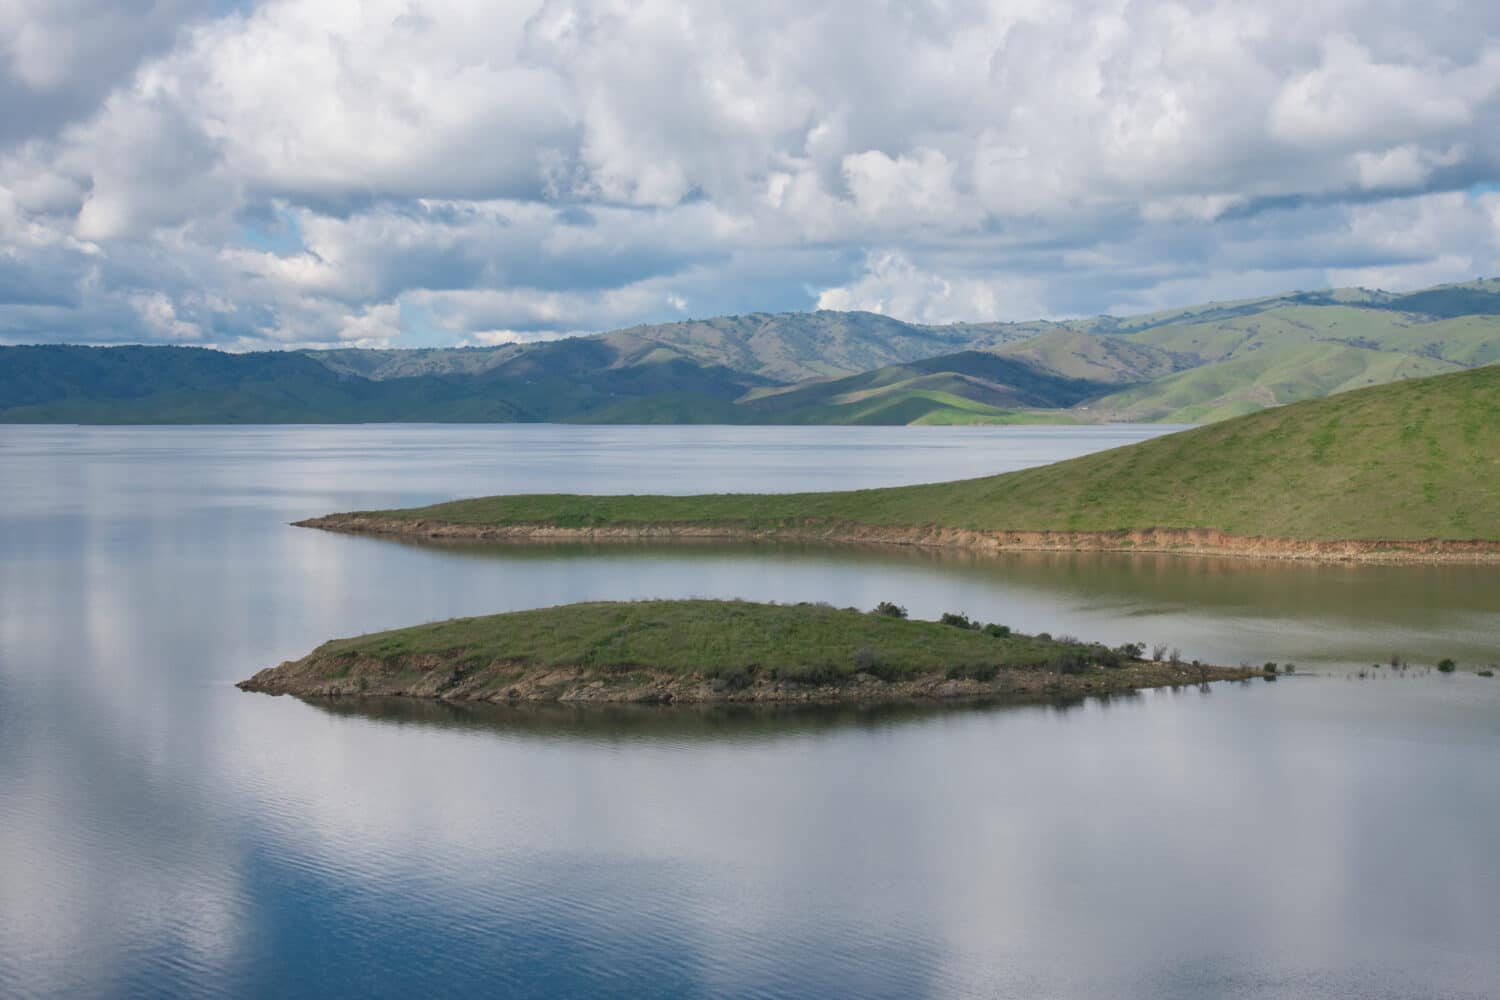 The San Luis Reservoir, the 5th largest in California, is again at full capacity in winter of 2017, for the first time since 2011, after heavy rains bring an end to a five year drought.